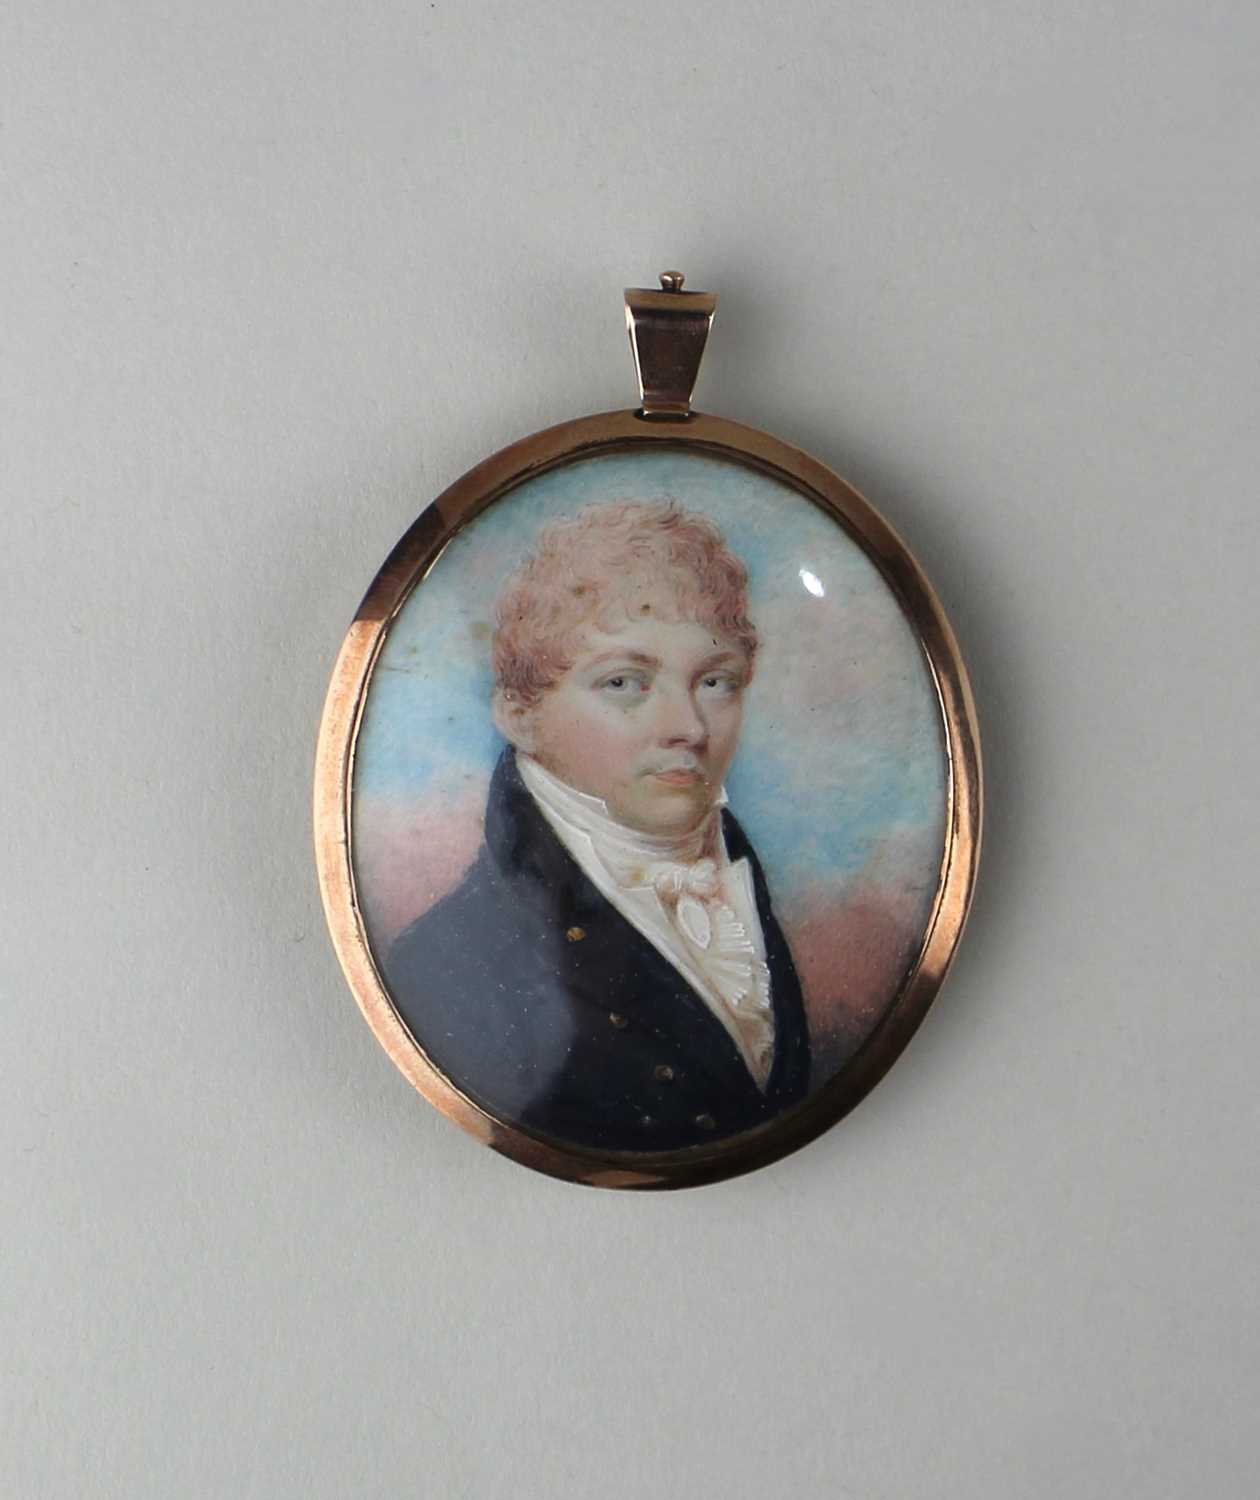 A gold mounted oval portrait miniature of a gentleman with curly pale brown hair wearing a black